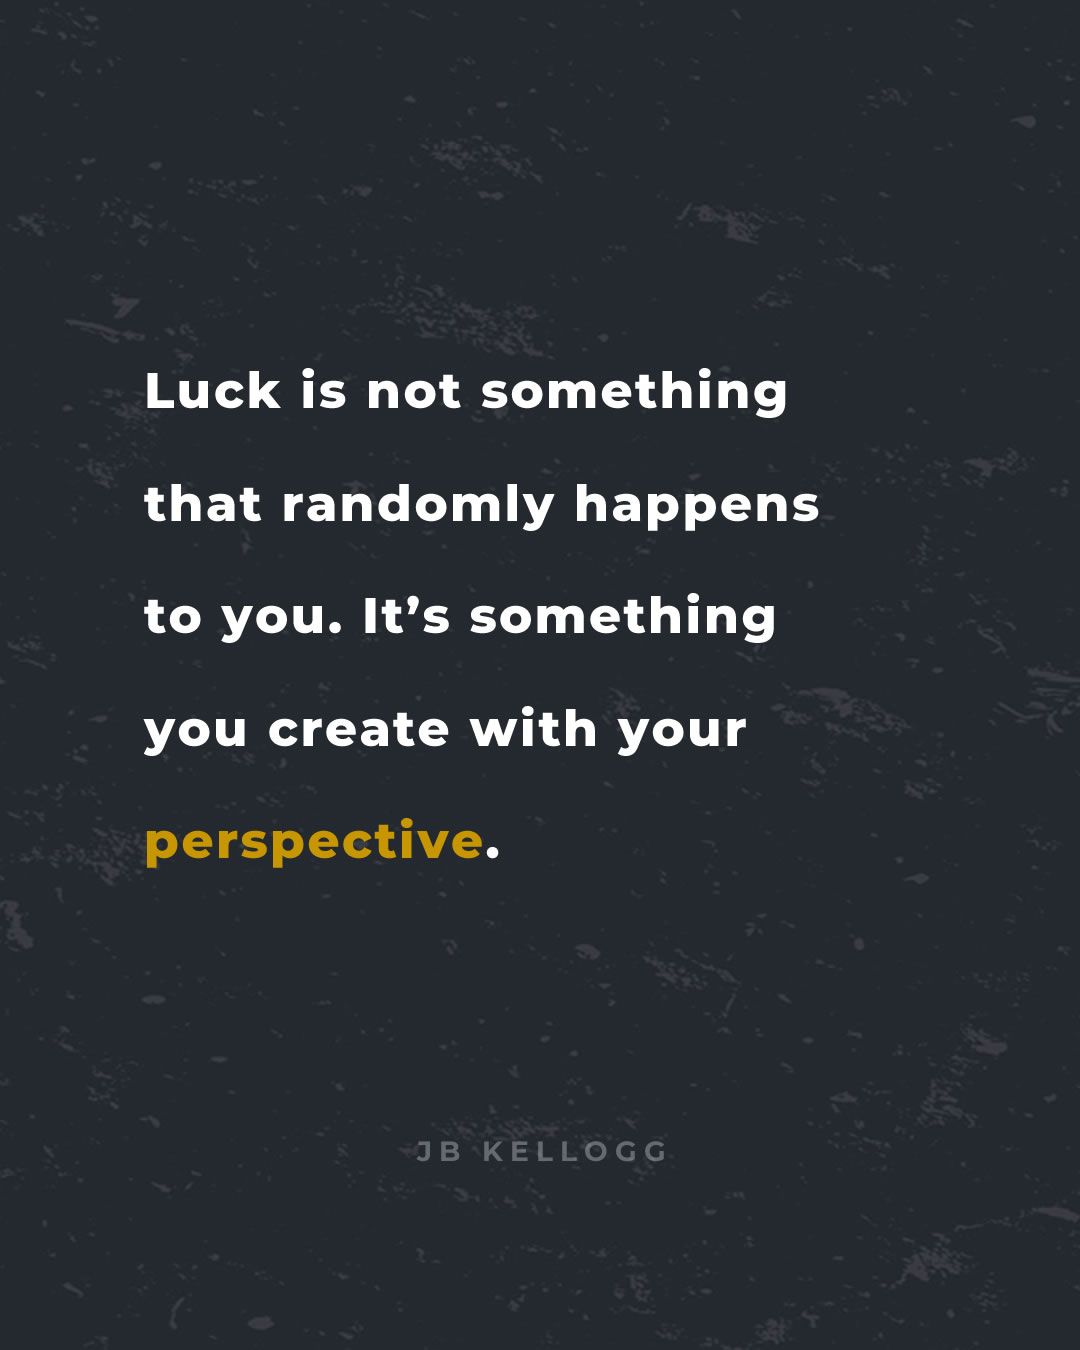 luck is something you create with your persepective - quote by jb kellogg.jpg